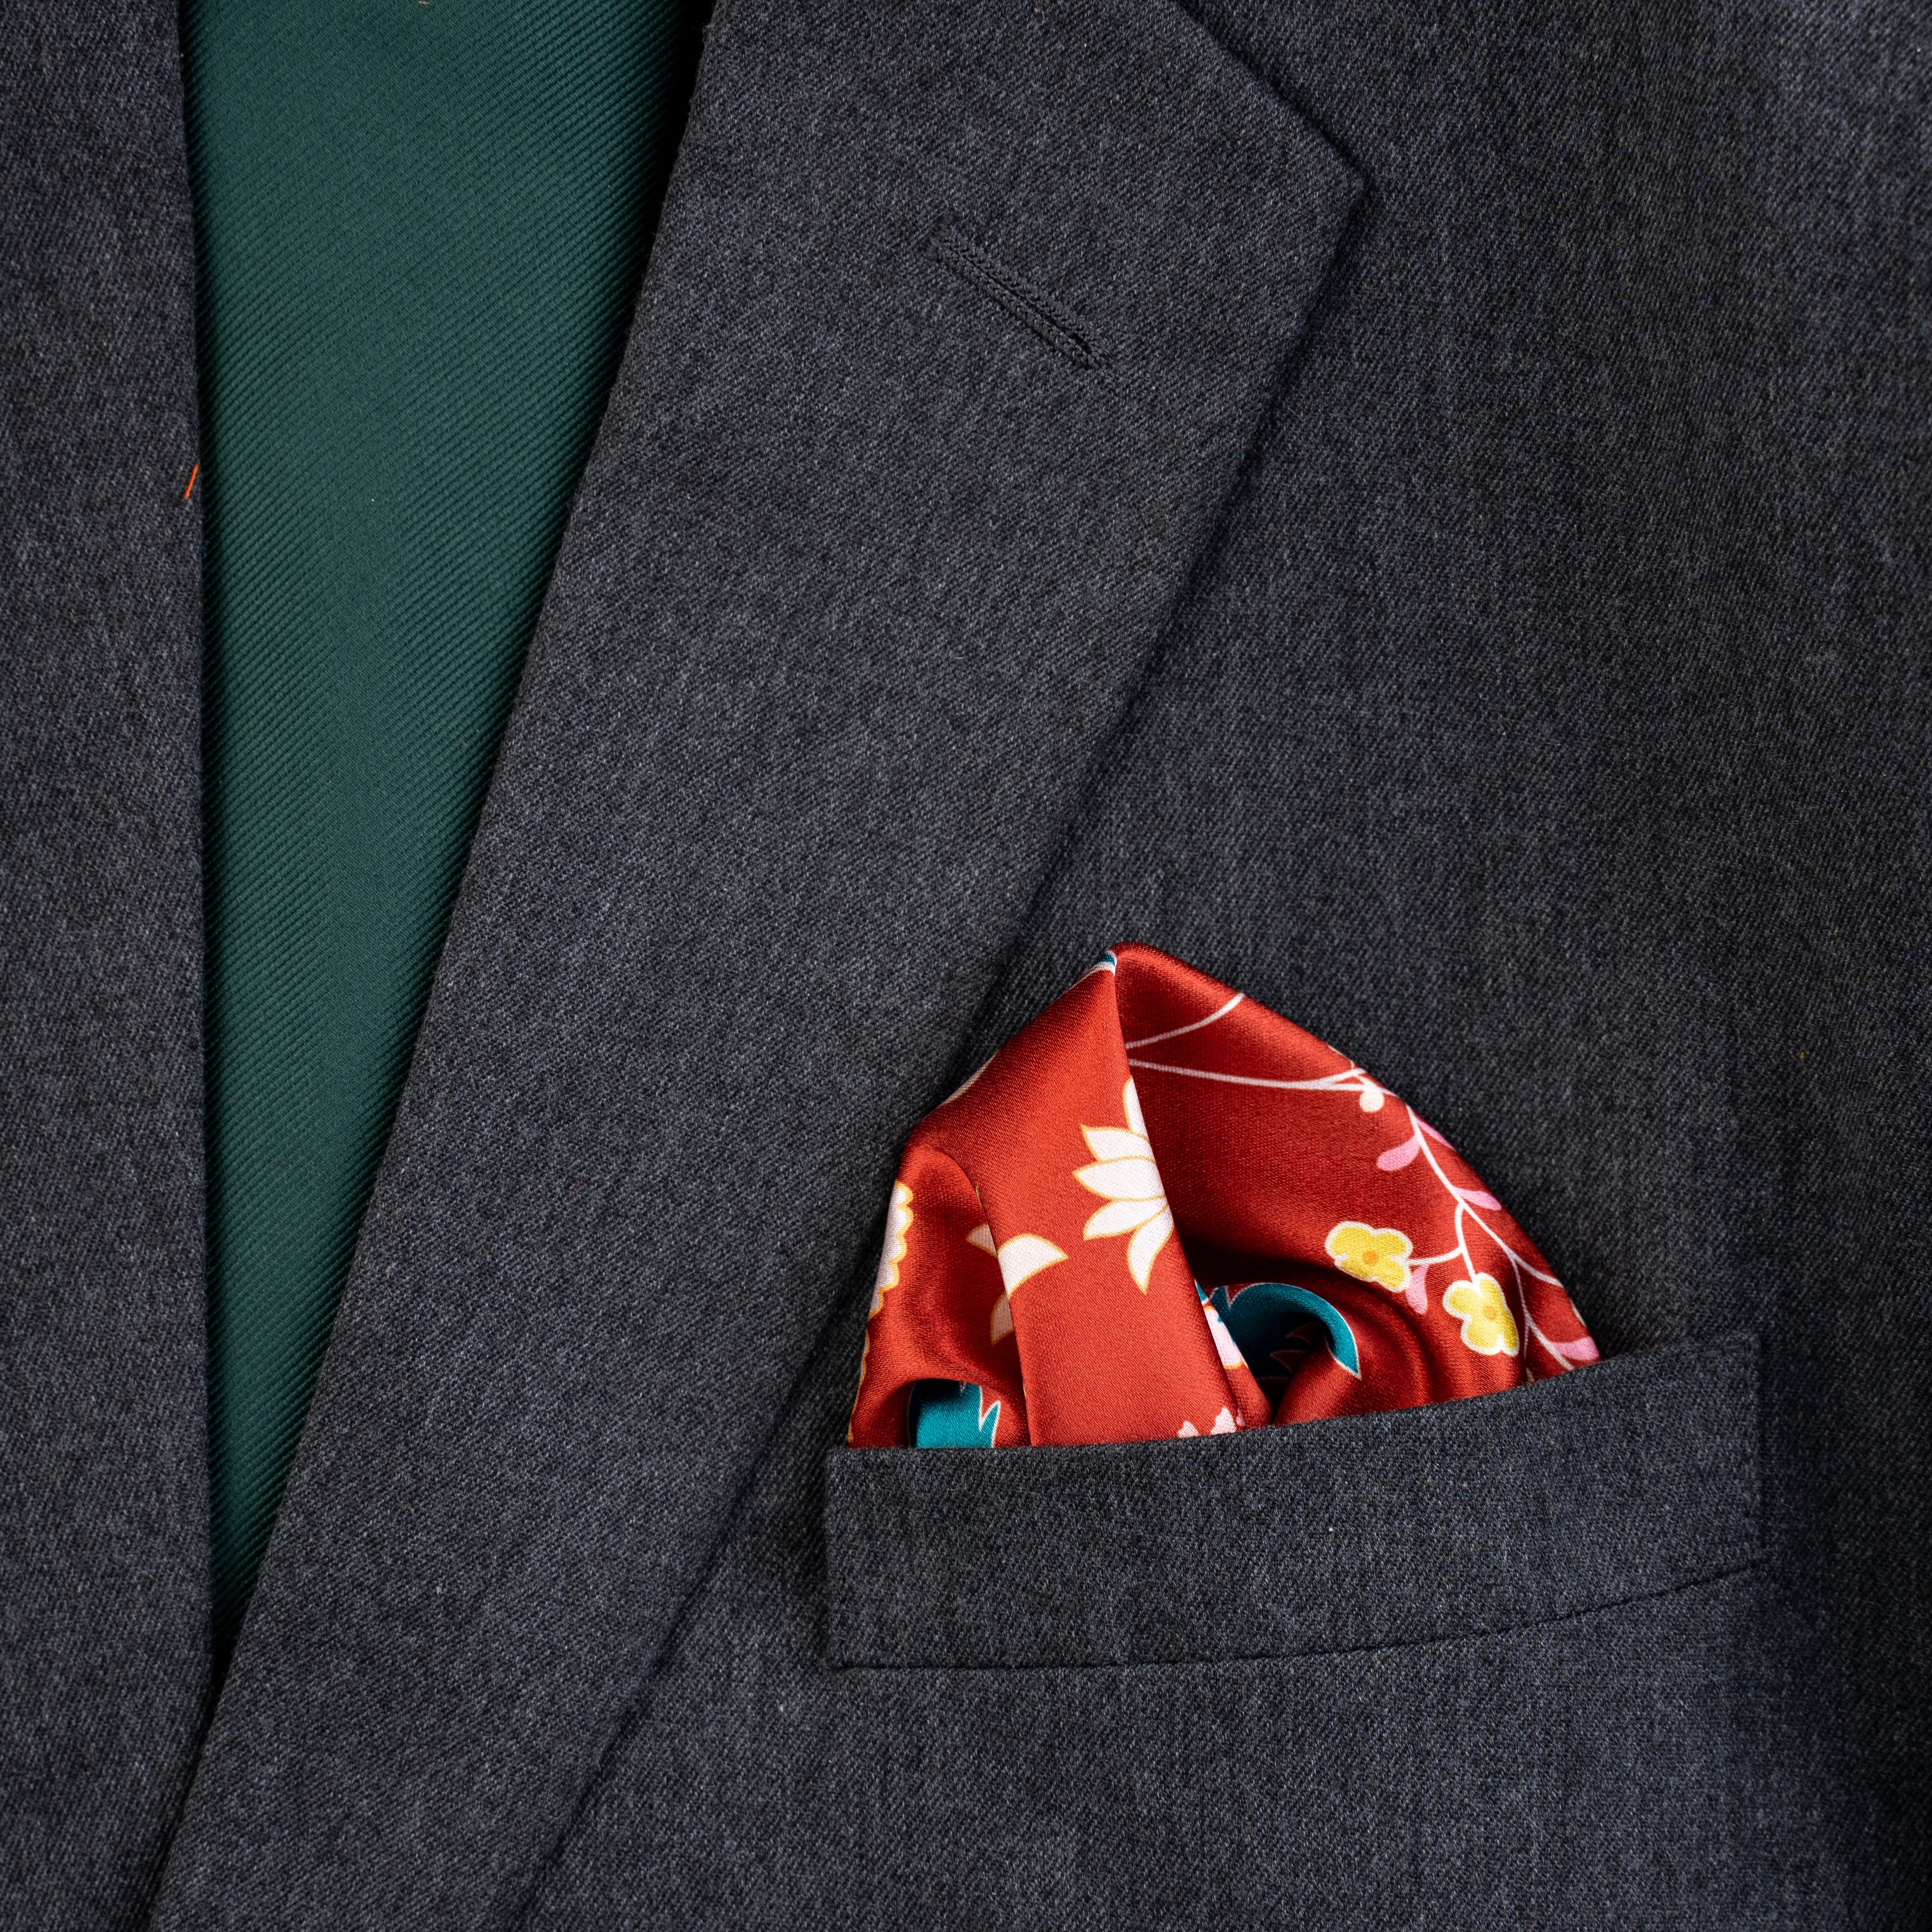 Pocket Square - Earthy Touch